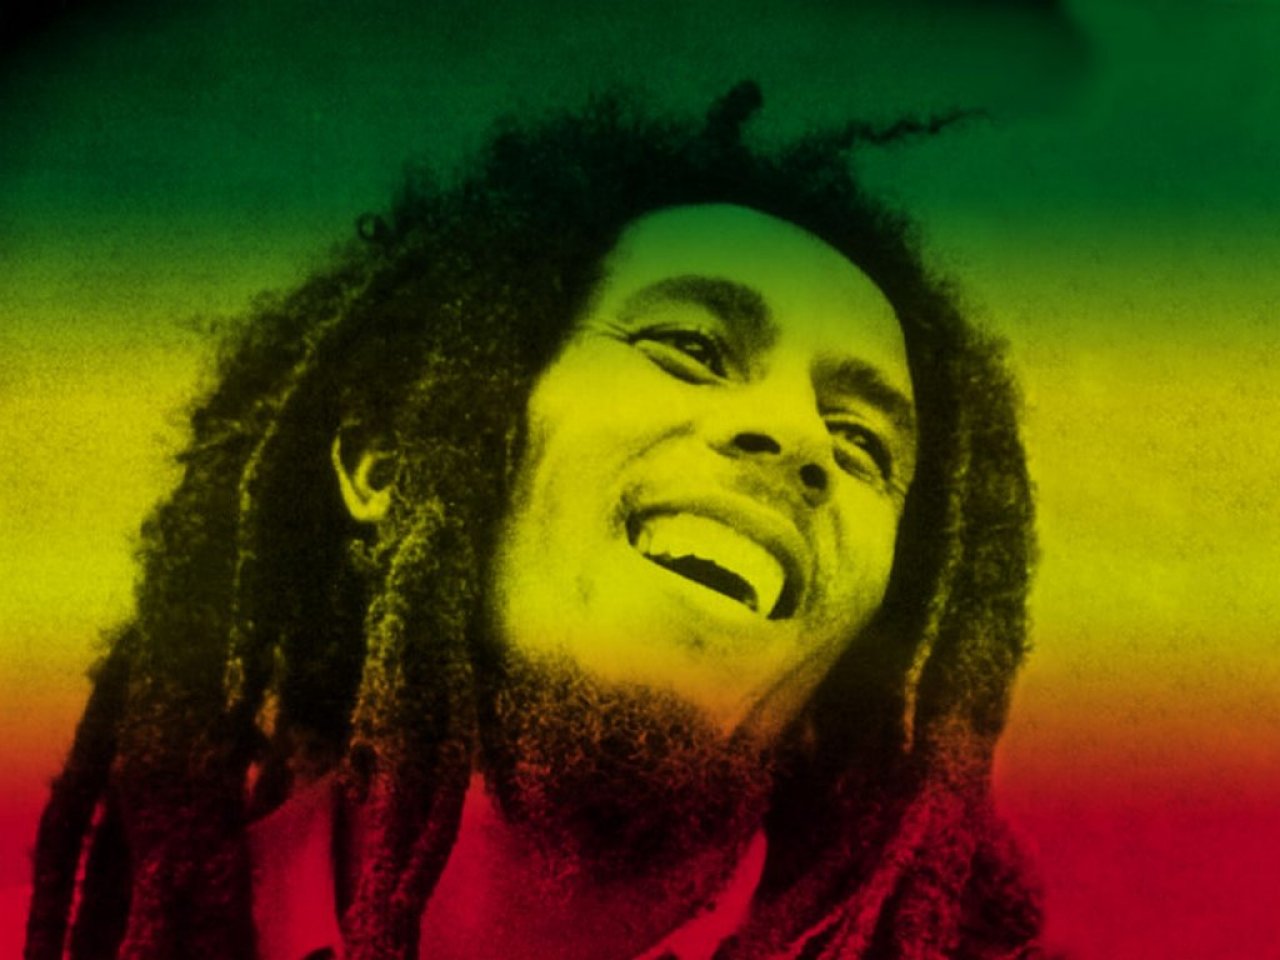 Bob Marley Picture